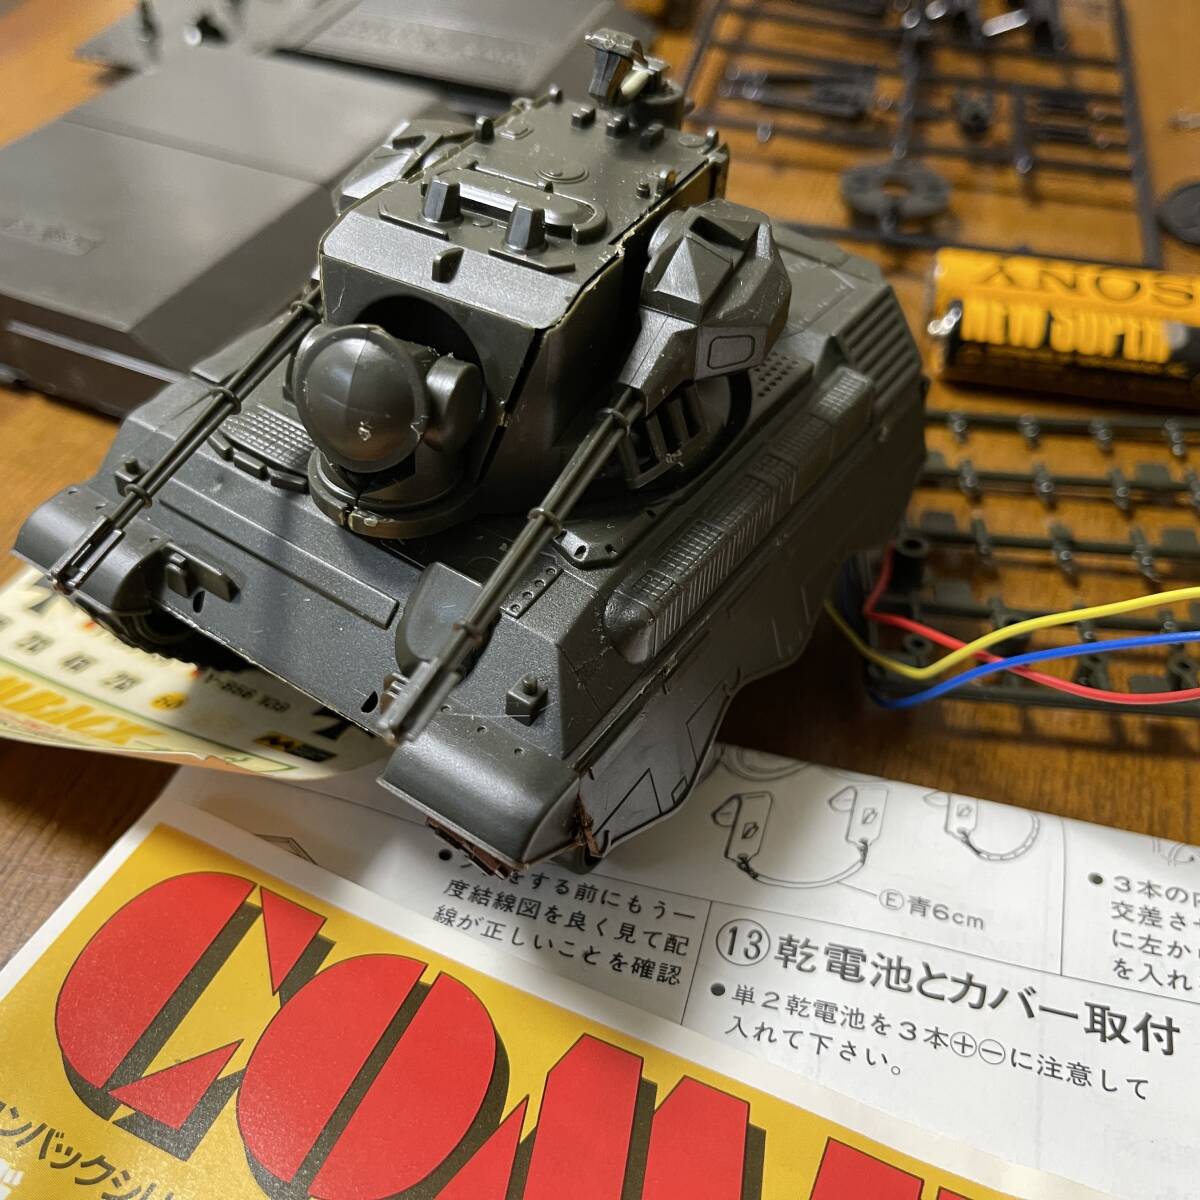 [ box opinion attaching! Junk : finished .. goods ] MITSUWAmitsuwamo Delco n back series NO.1 GEPARDge Pal do* west Germany anti-aircraft tank remote control No.931